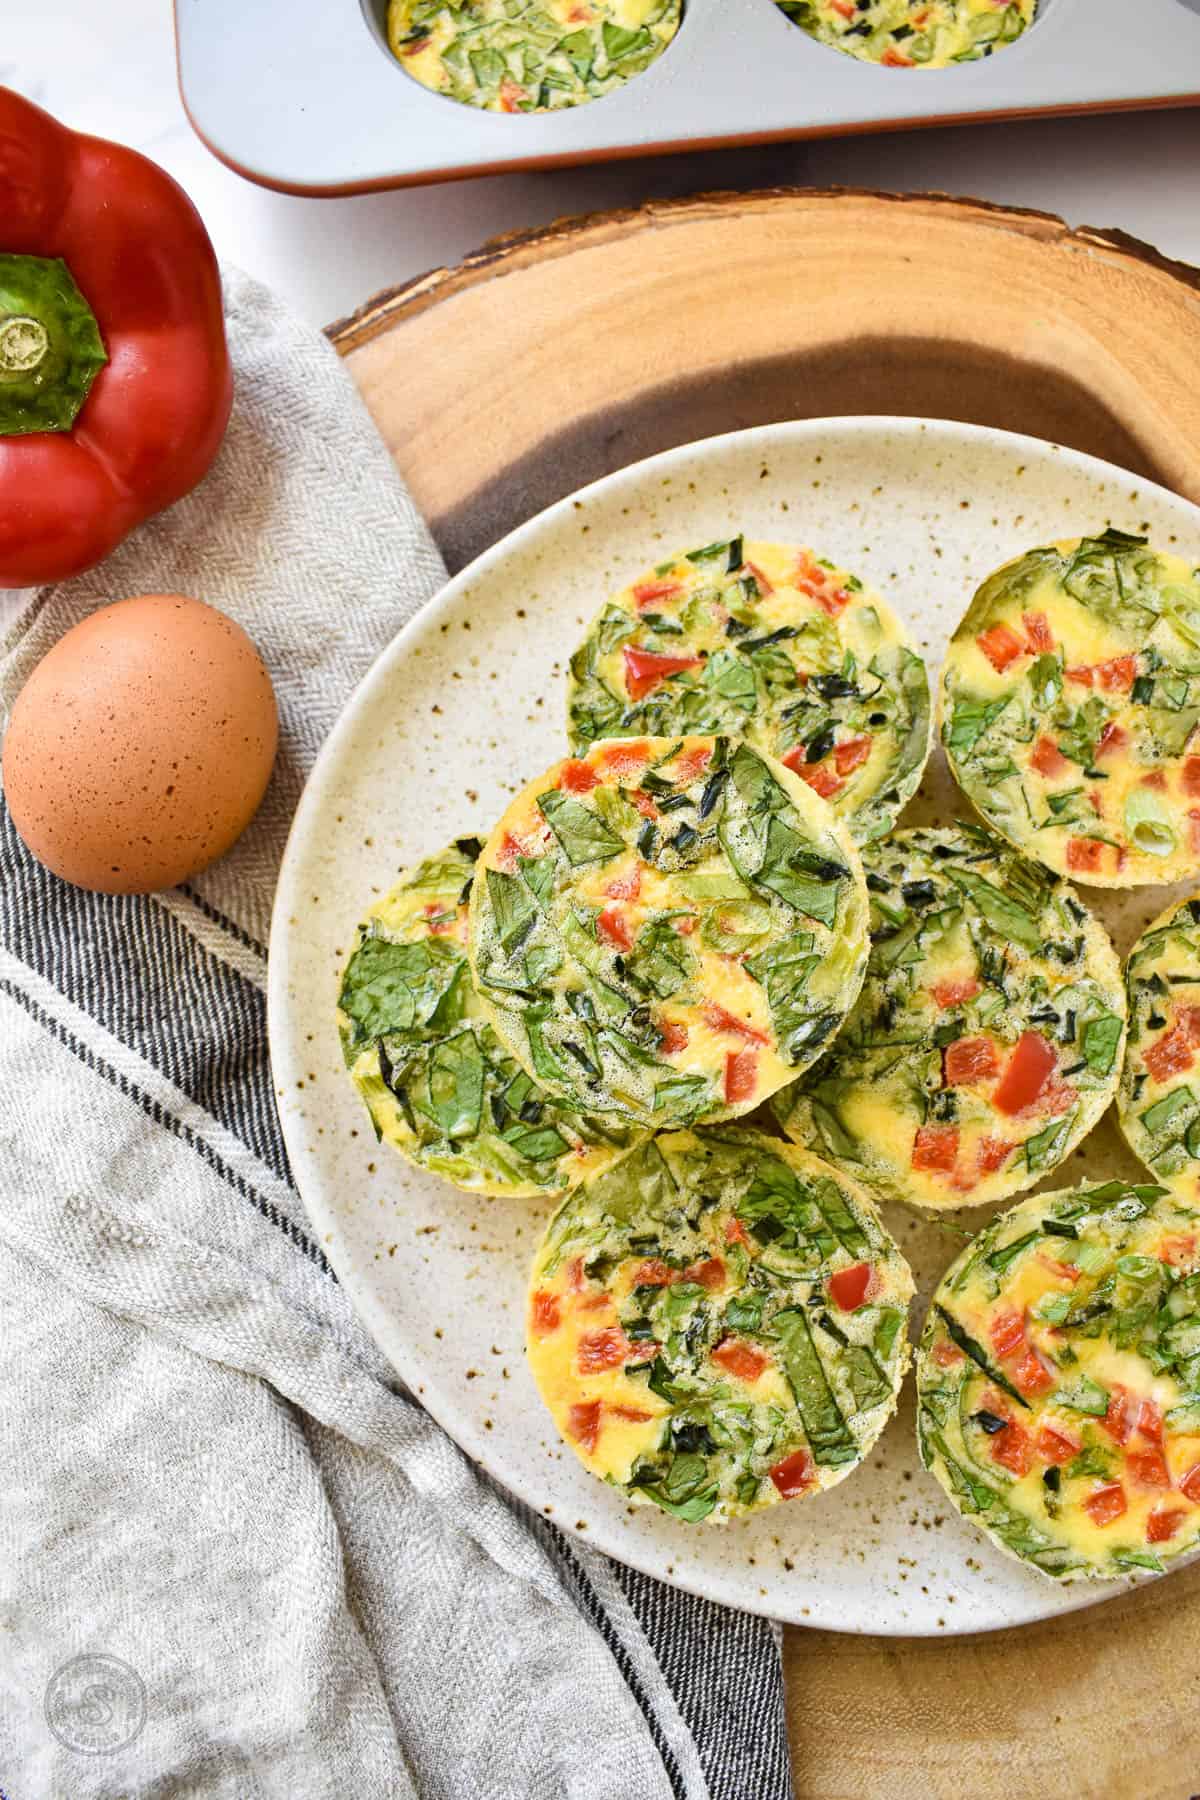 Round yellow egg bites full of spinach and diced bell pepper stacked on a tan speckled plate on a wood platter